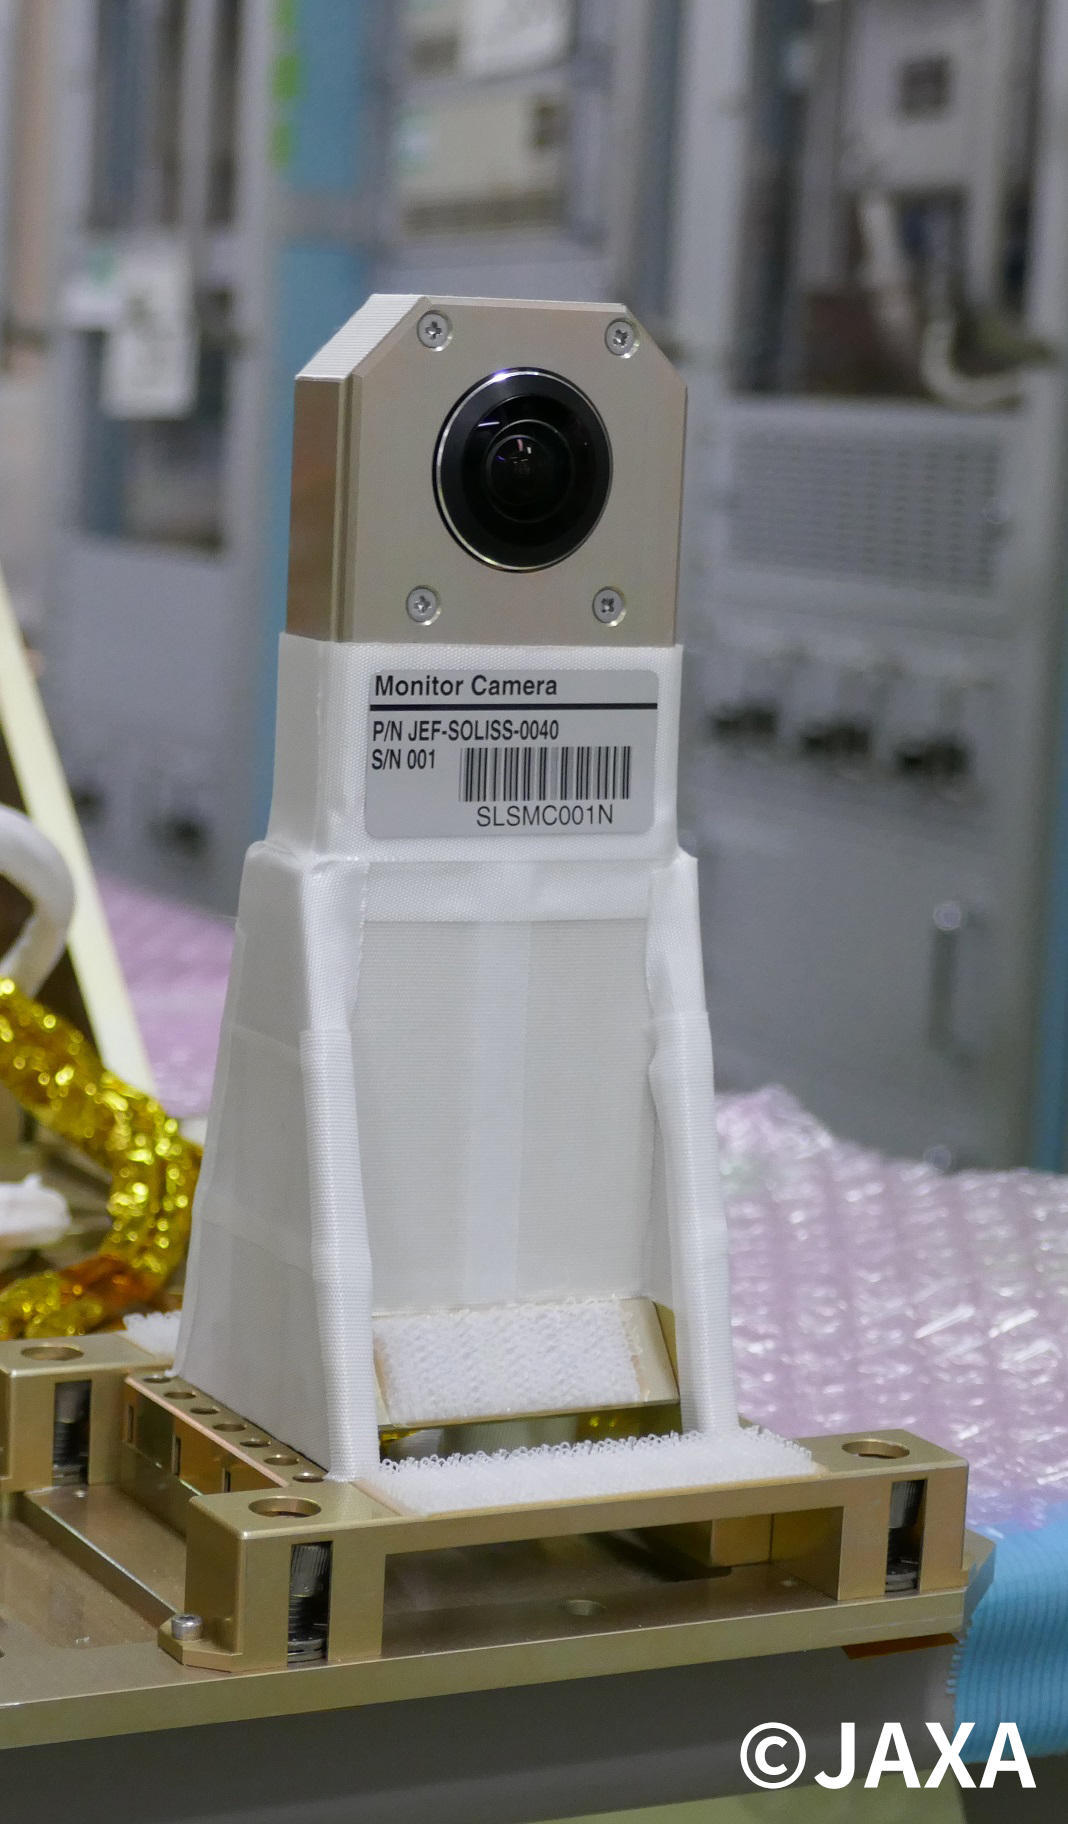 Image of the camera